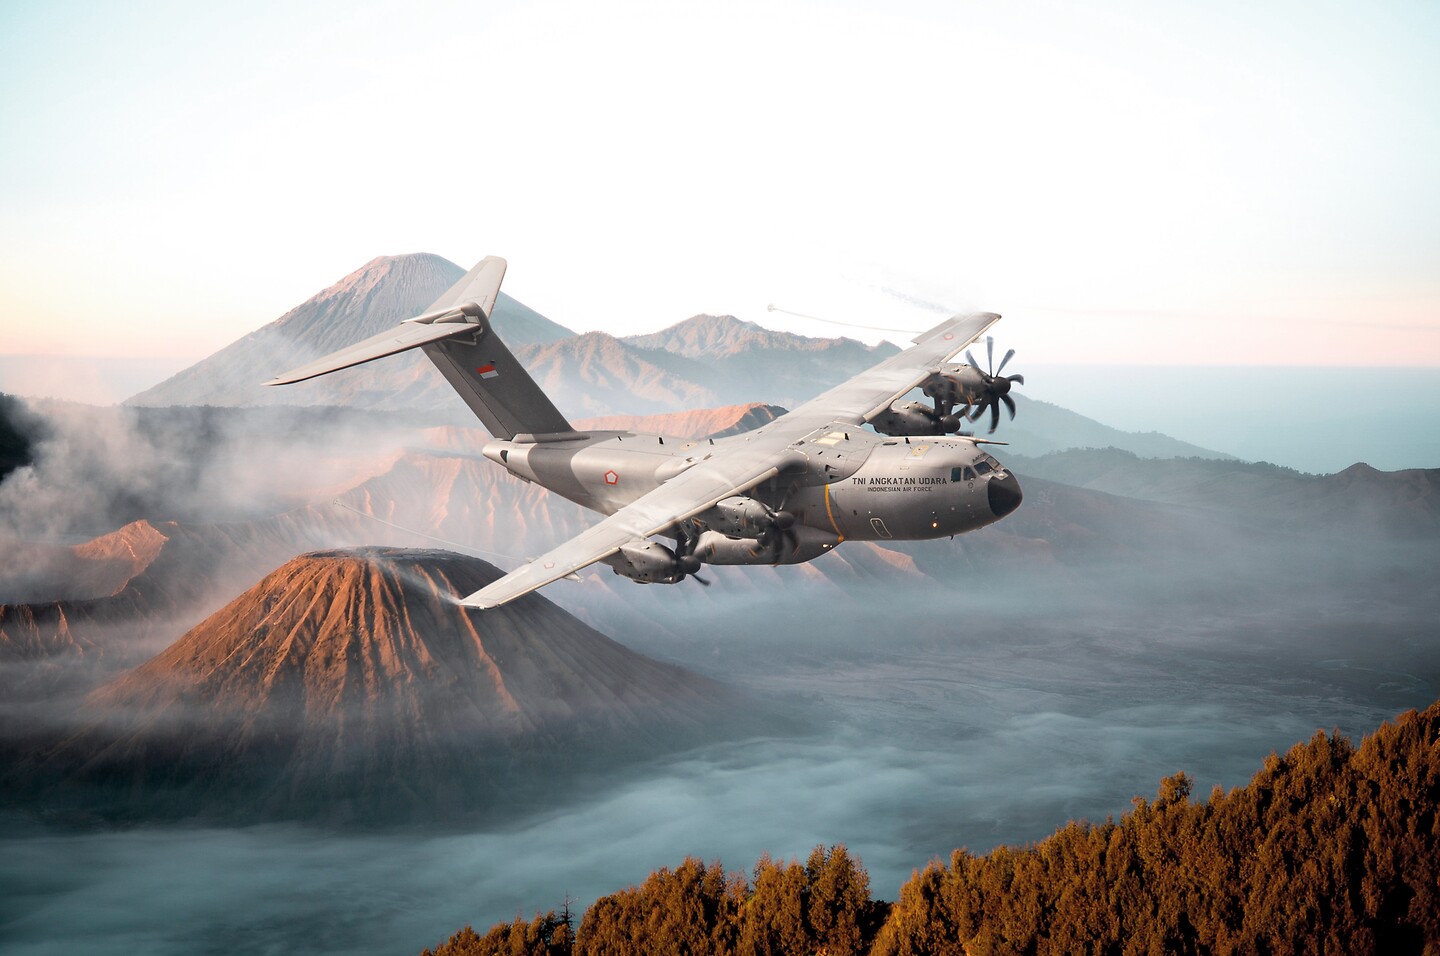 Indonesia Ministry of Defence Orders Two Airbus A400M Atlas Military Transport Aircrafts